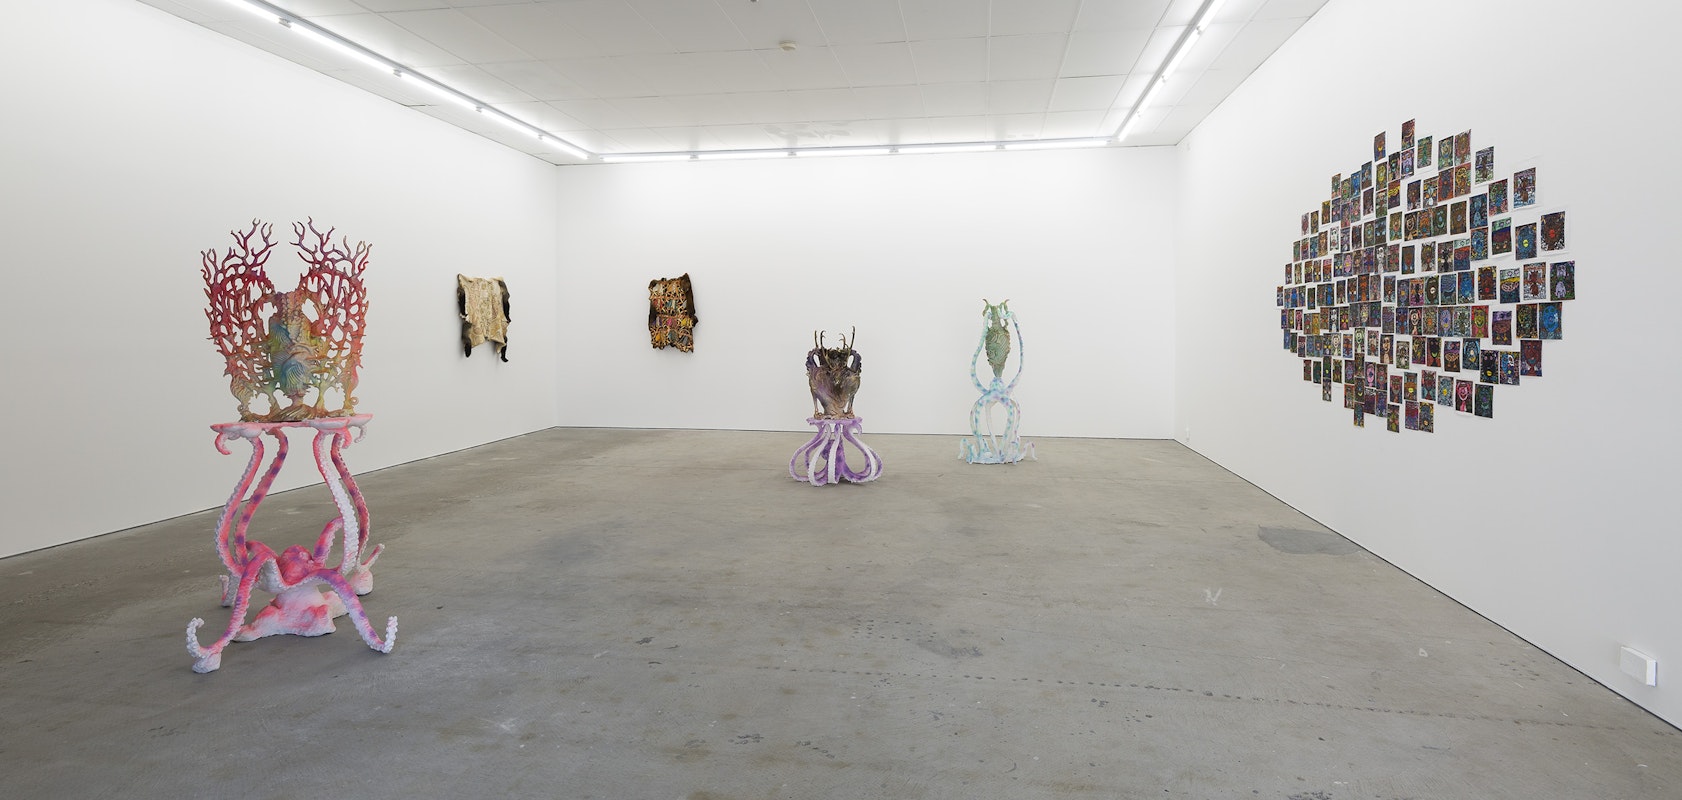 Installation view of Octopus 22: Baroquetopus curated by Tessa Laird, featuring work by Gina Bundle, Kate Rohde and Ivor Cantrill, presented at Gertrude Contemporary 2022. Photo: Christian Capurro. 